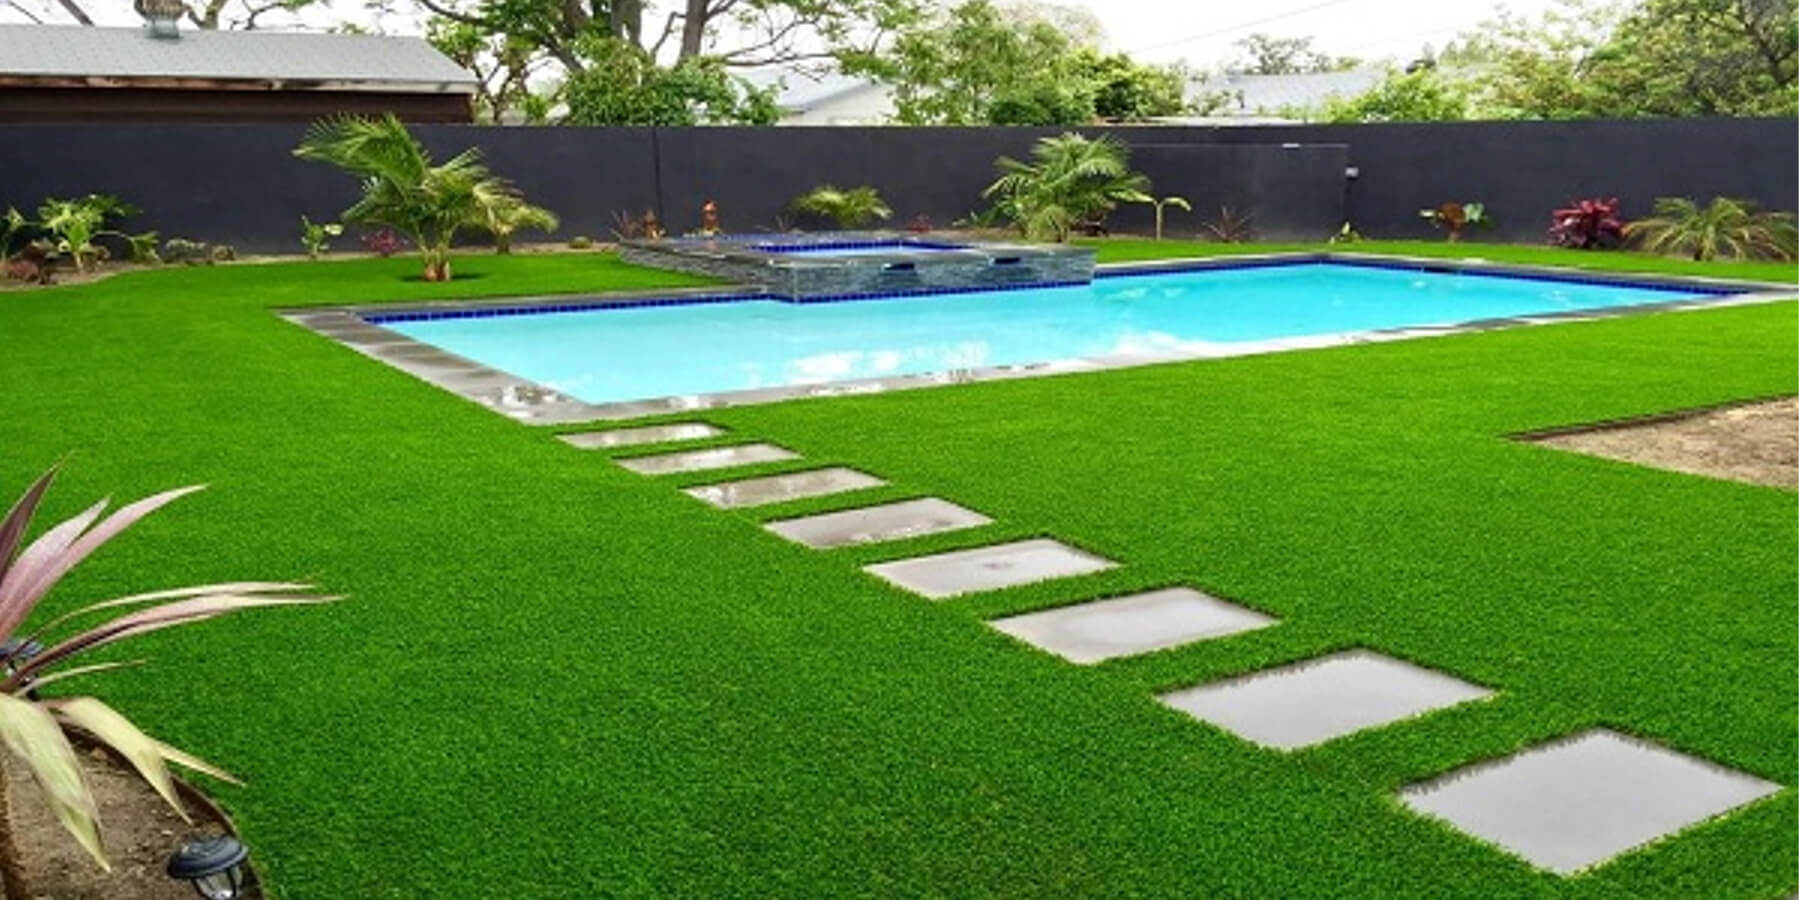 How to choose a good synthetic grass